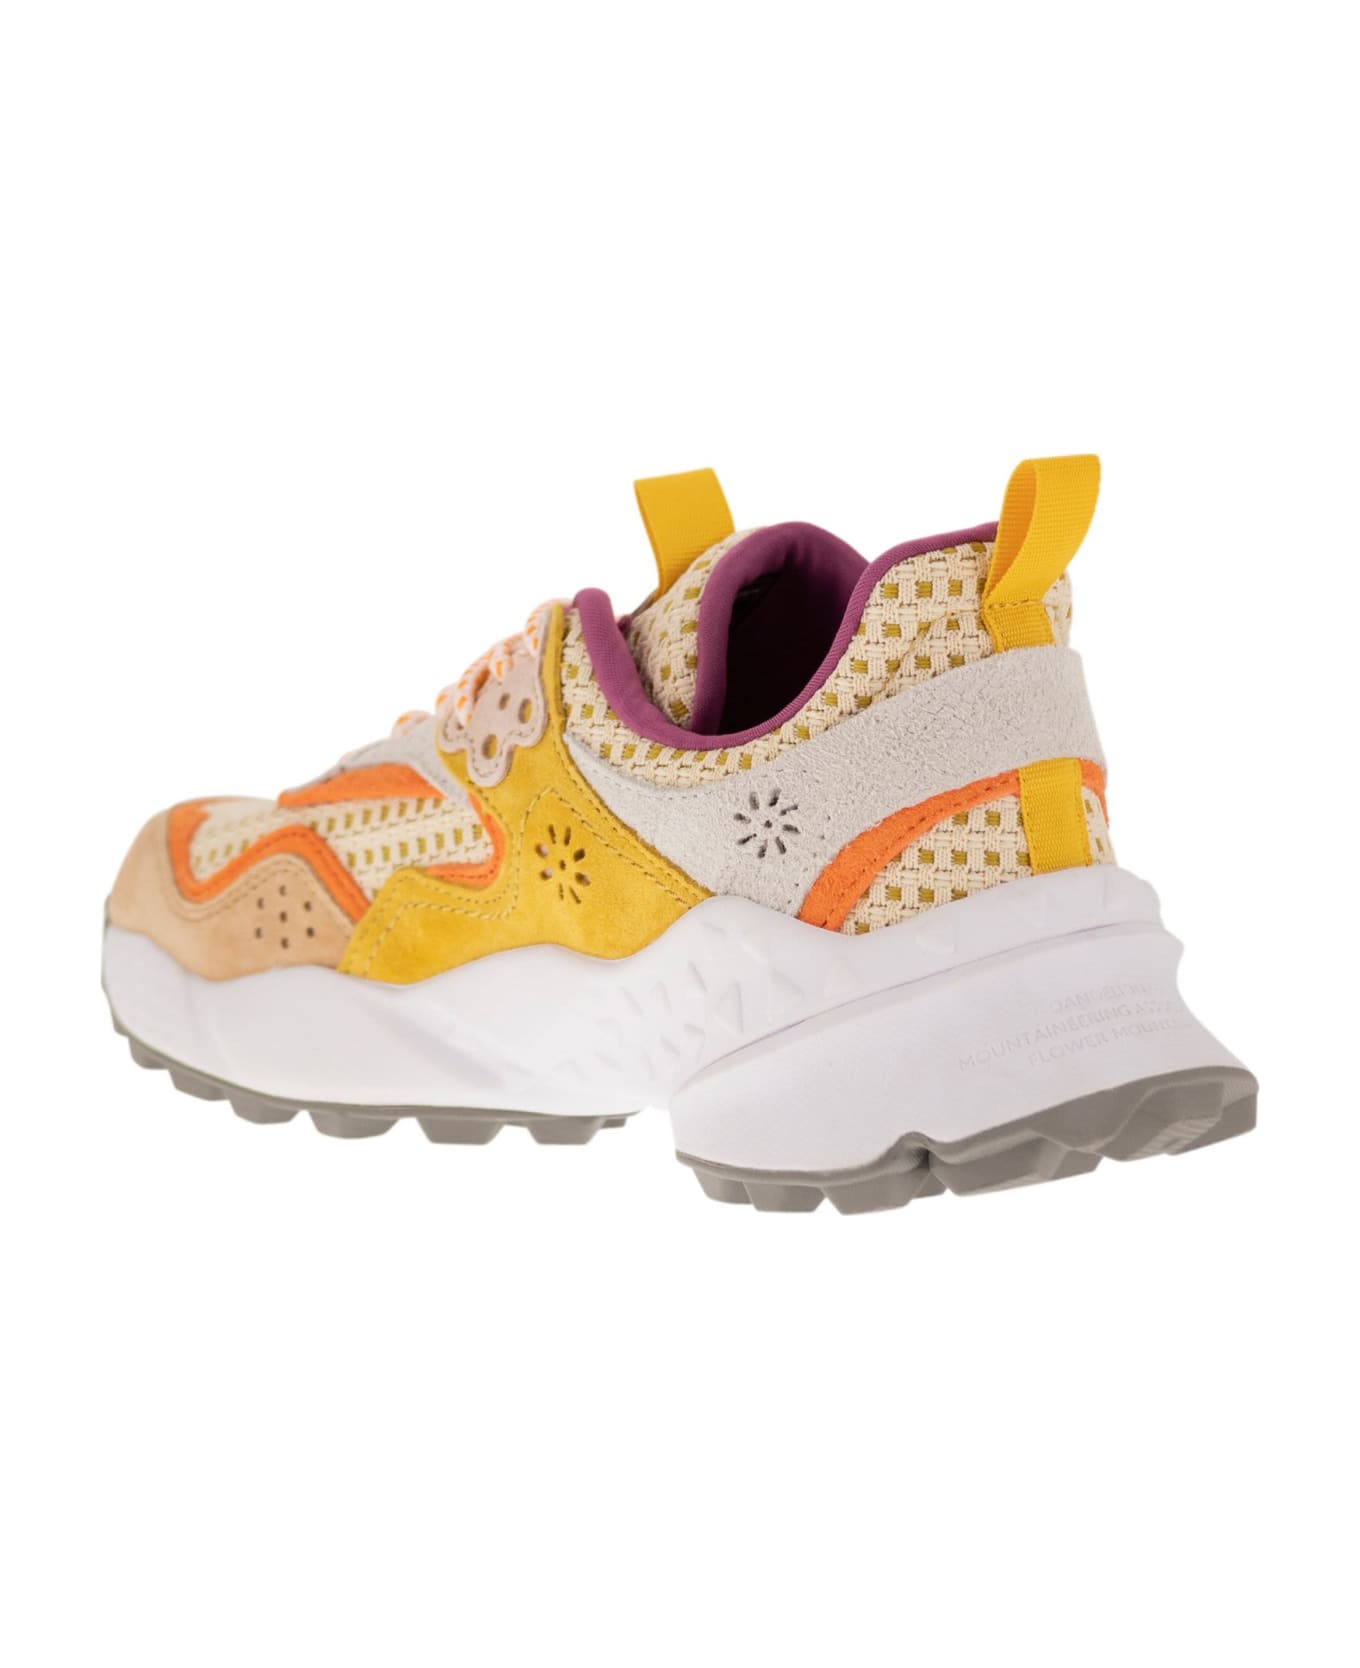 Flower Mountain Kotetsu - Sneakers In Suede And Technical Fabric - Beige/ocra